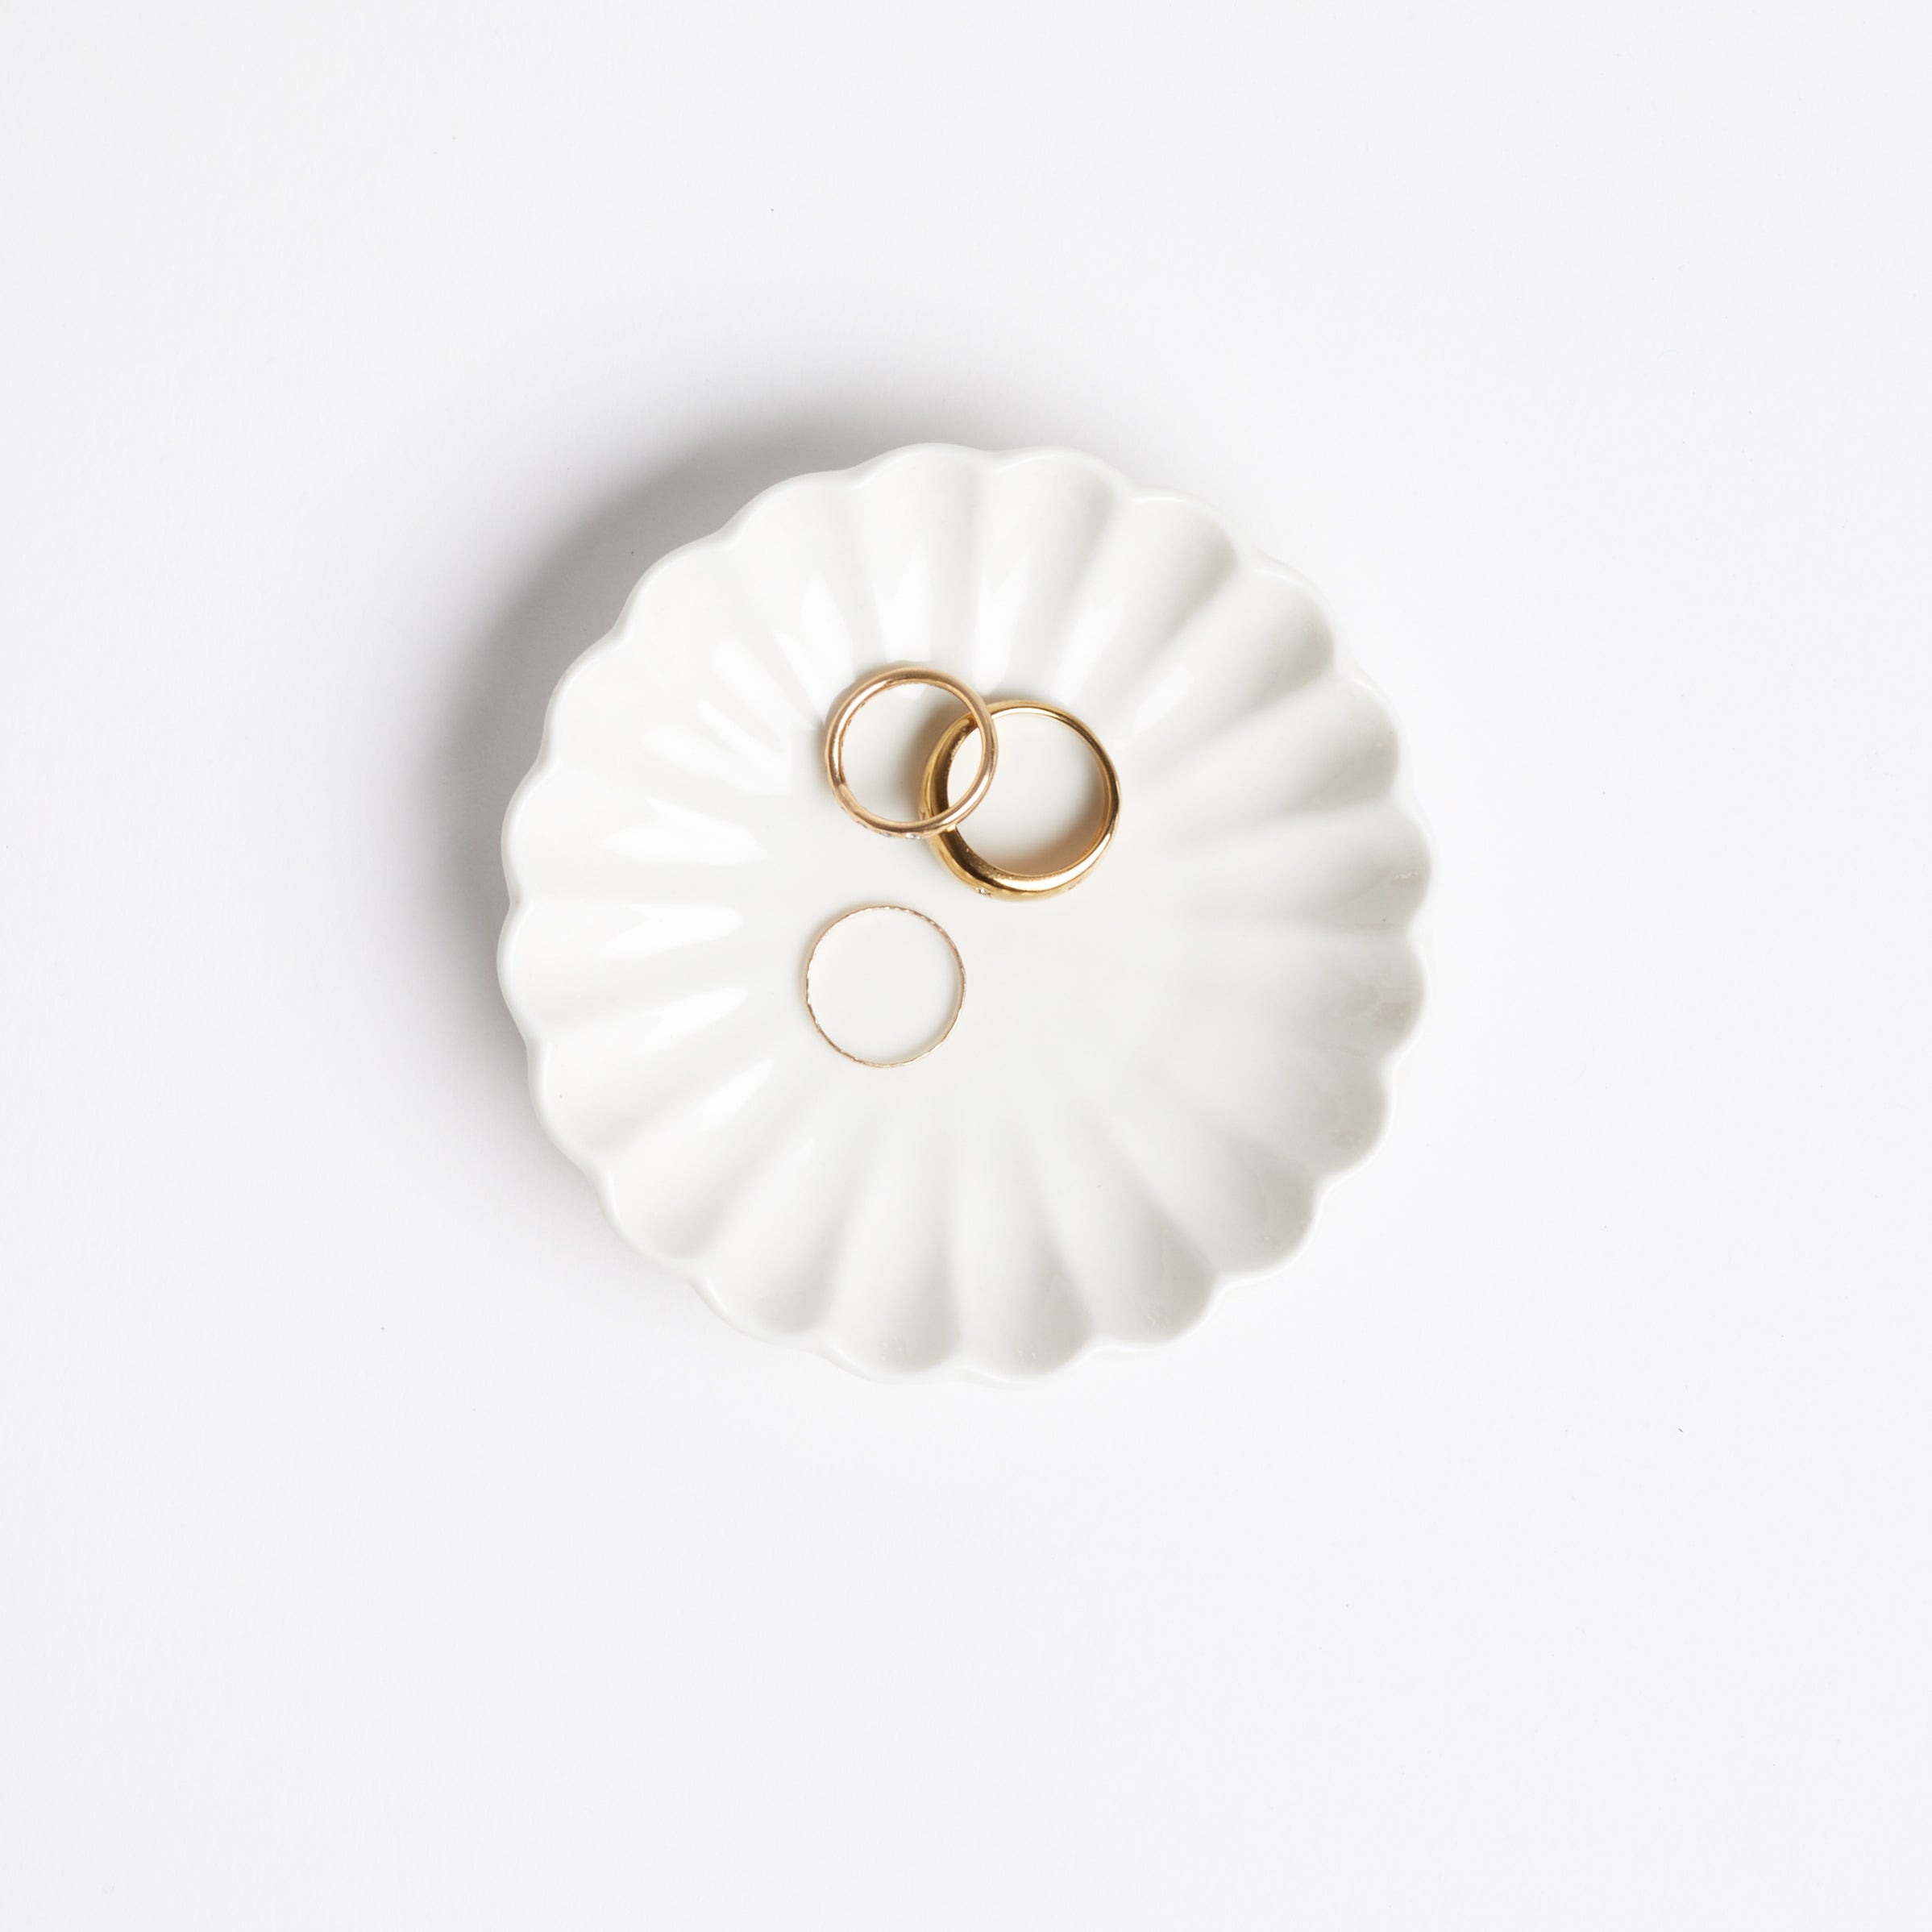 White scallop ring dish with gold rings on white background